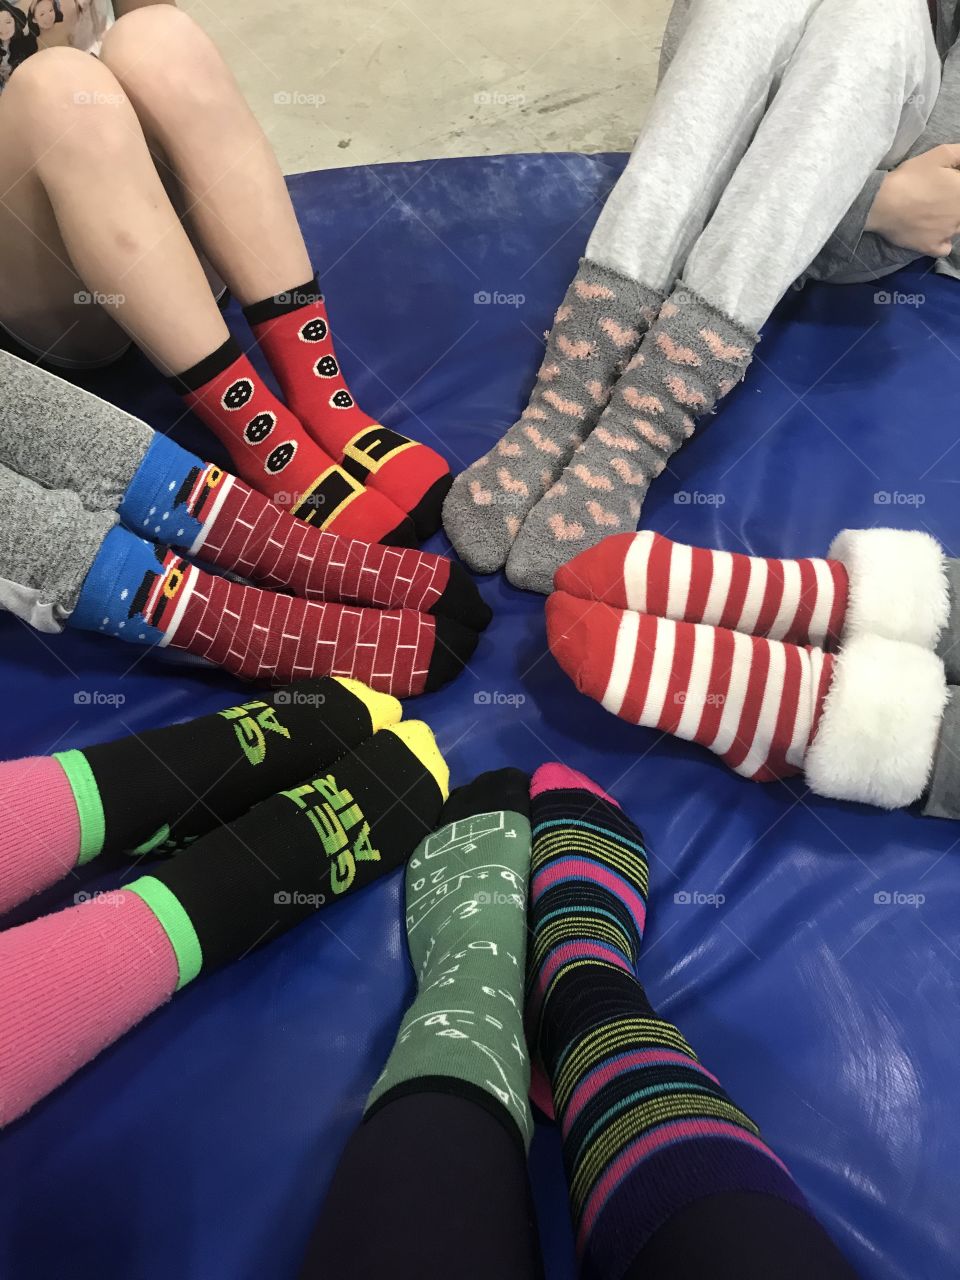 I coach gymnastics in addition to my regular teaching job.  This picture was taken at our crazy sock day this year.  Trying to add a little fun to a year that has people staying far apart due to the virus.  